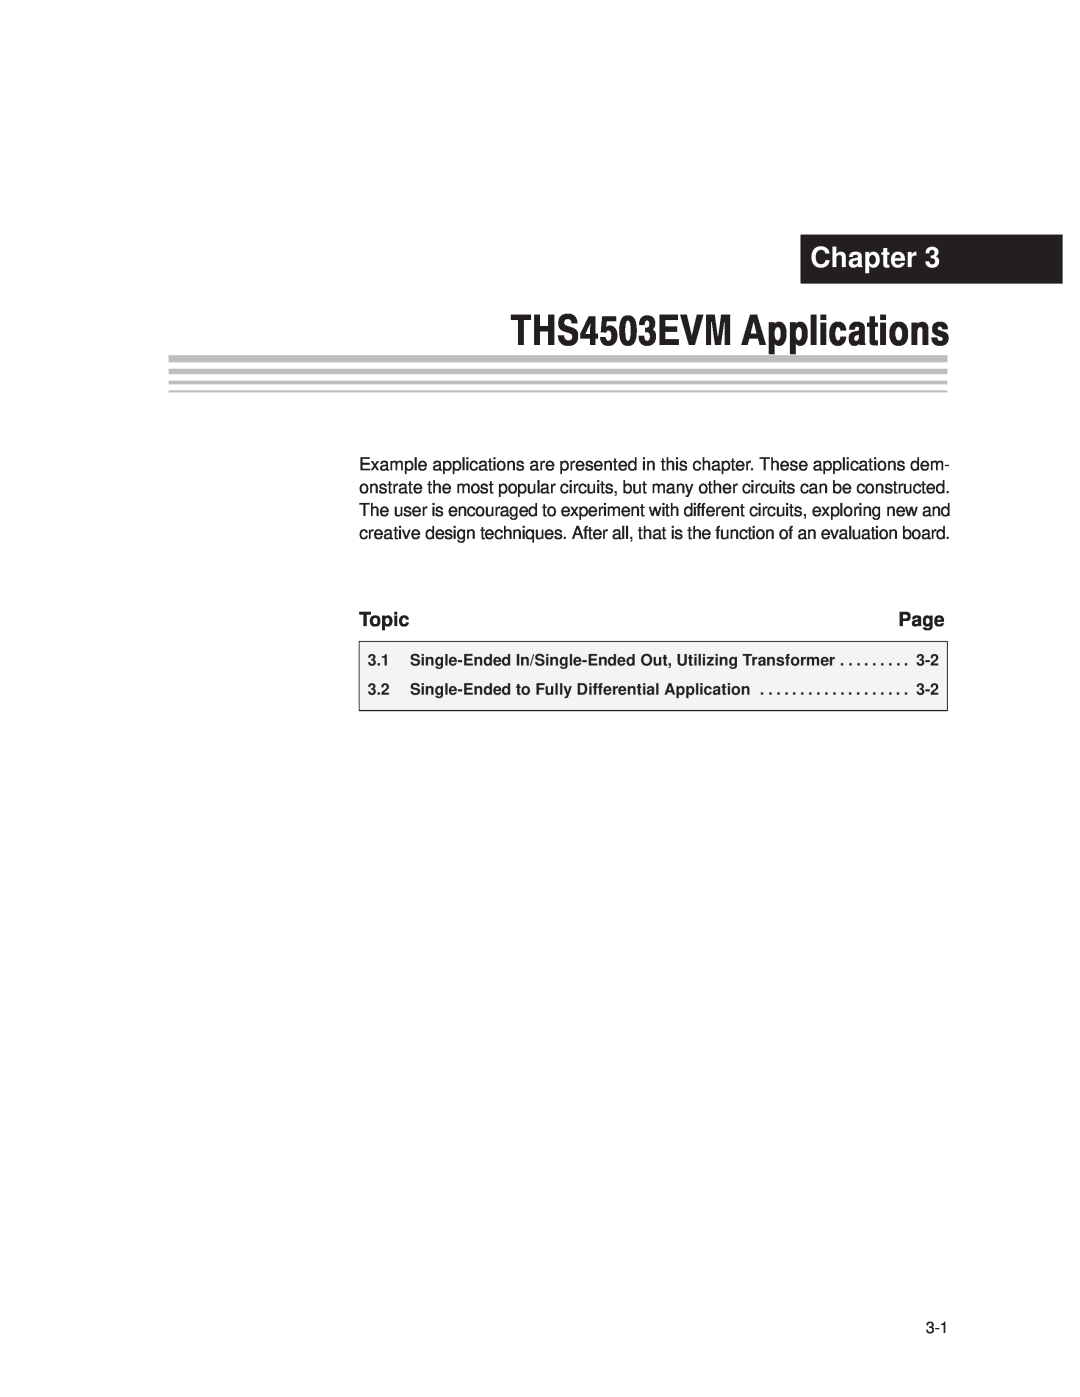 Texas Instruments manual Chapter, Page, Topic, Single-Endedto Fully Differential Application, THS4503EVM Applications 